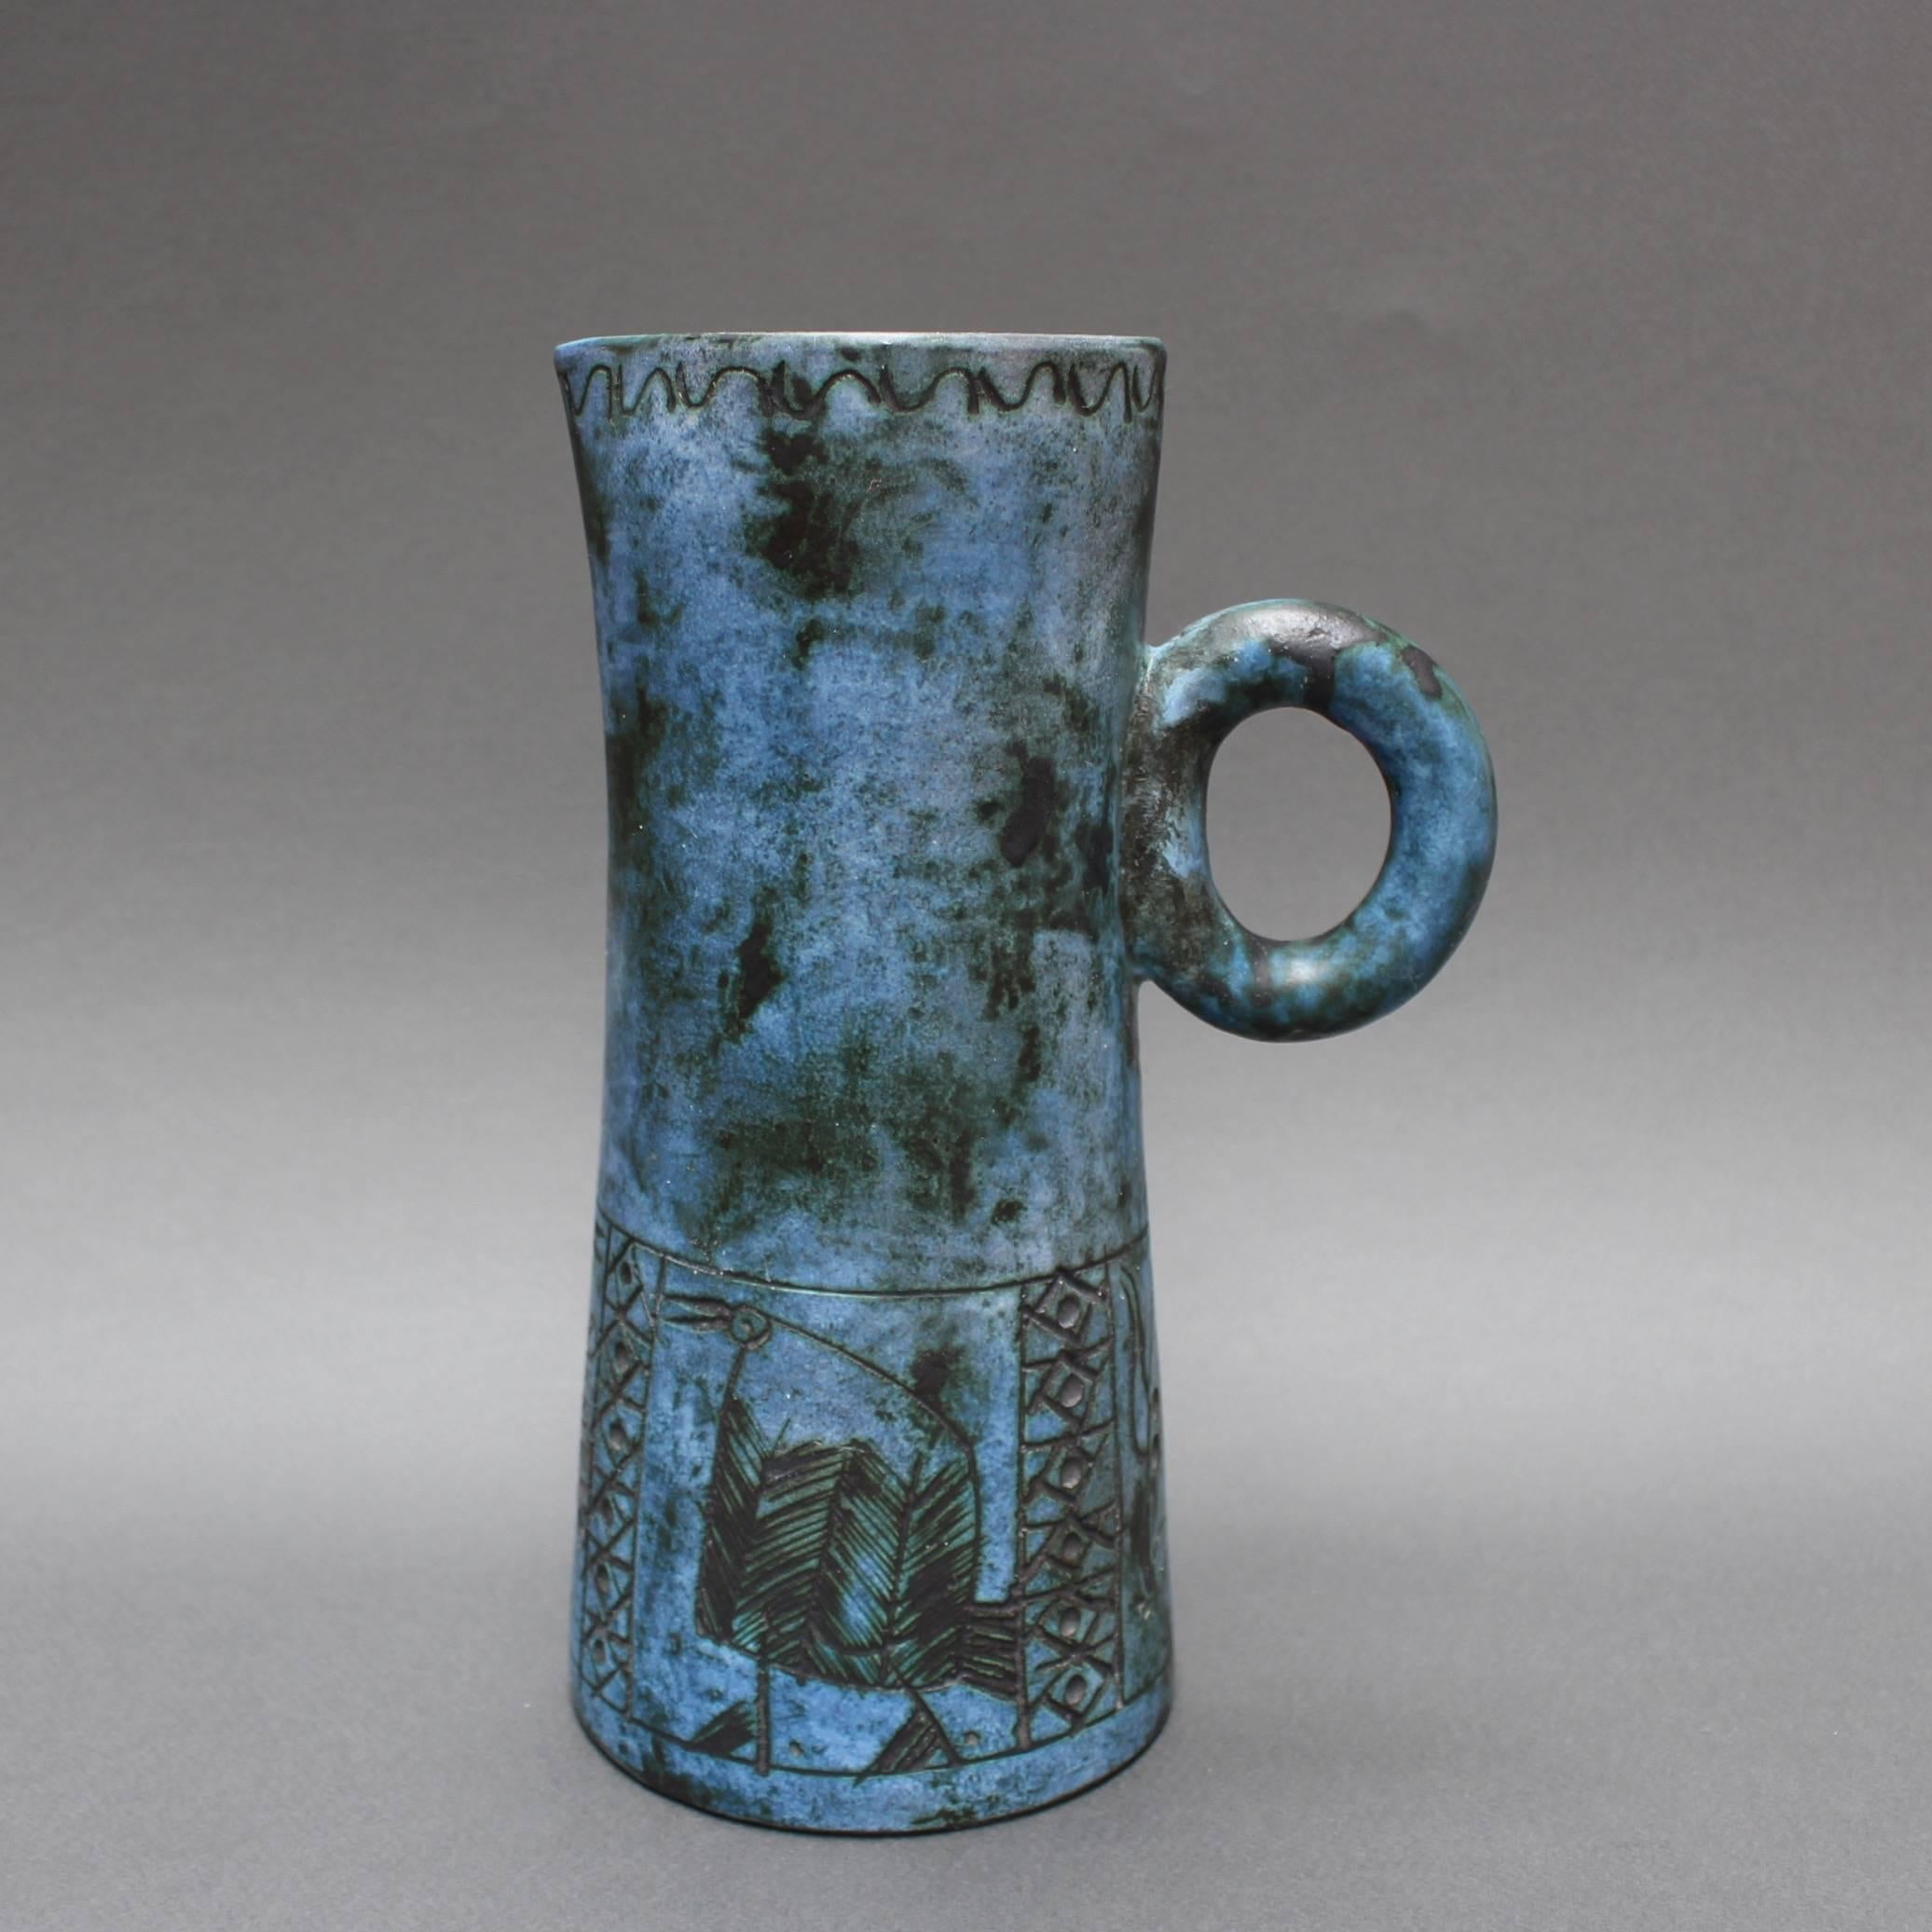 This elegant ceramic pitcher has Blin's trademark cloudy blue glaze featuring primitive images of birds and a bull, seemingly from an undiscovered cave, etched around the lower half of the vessel. The mouth also has a decorative surround motif. This